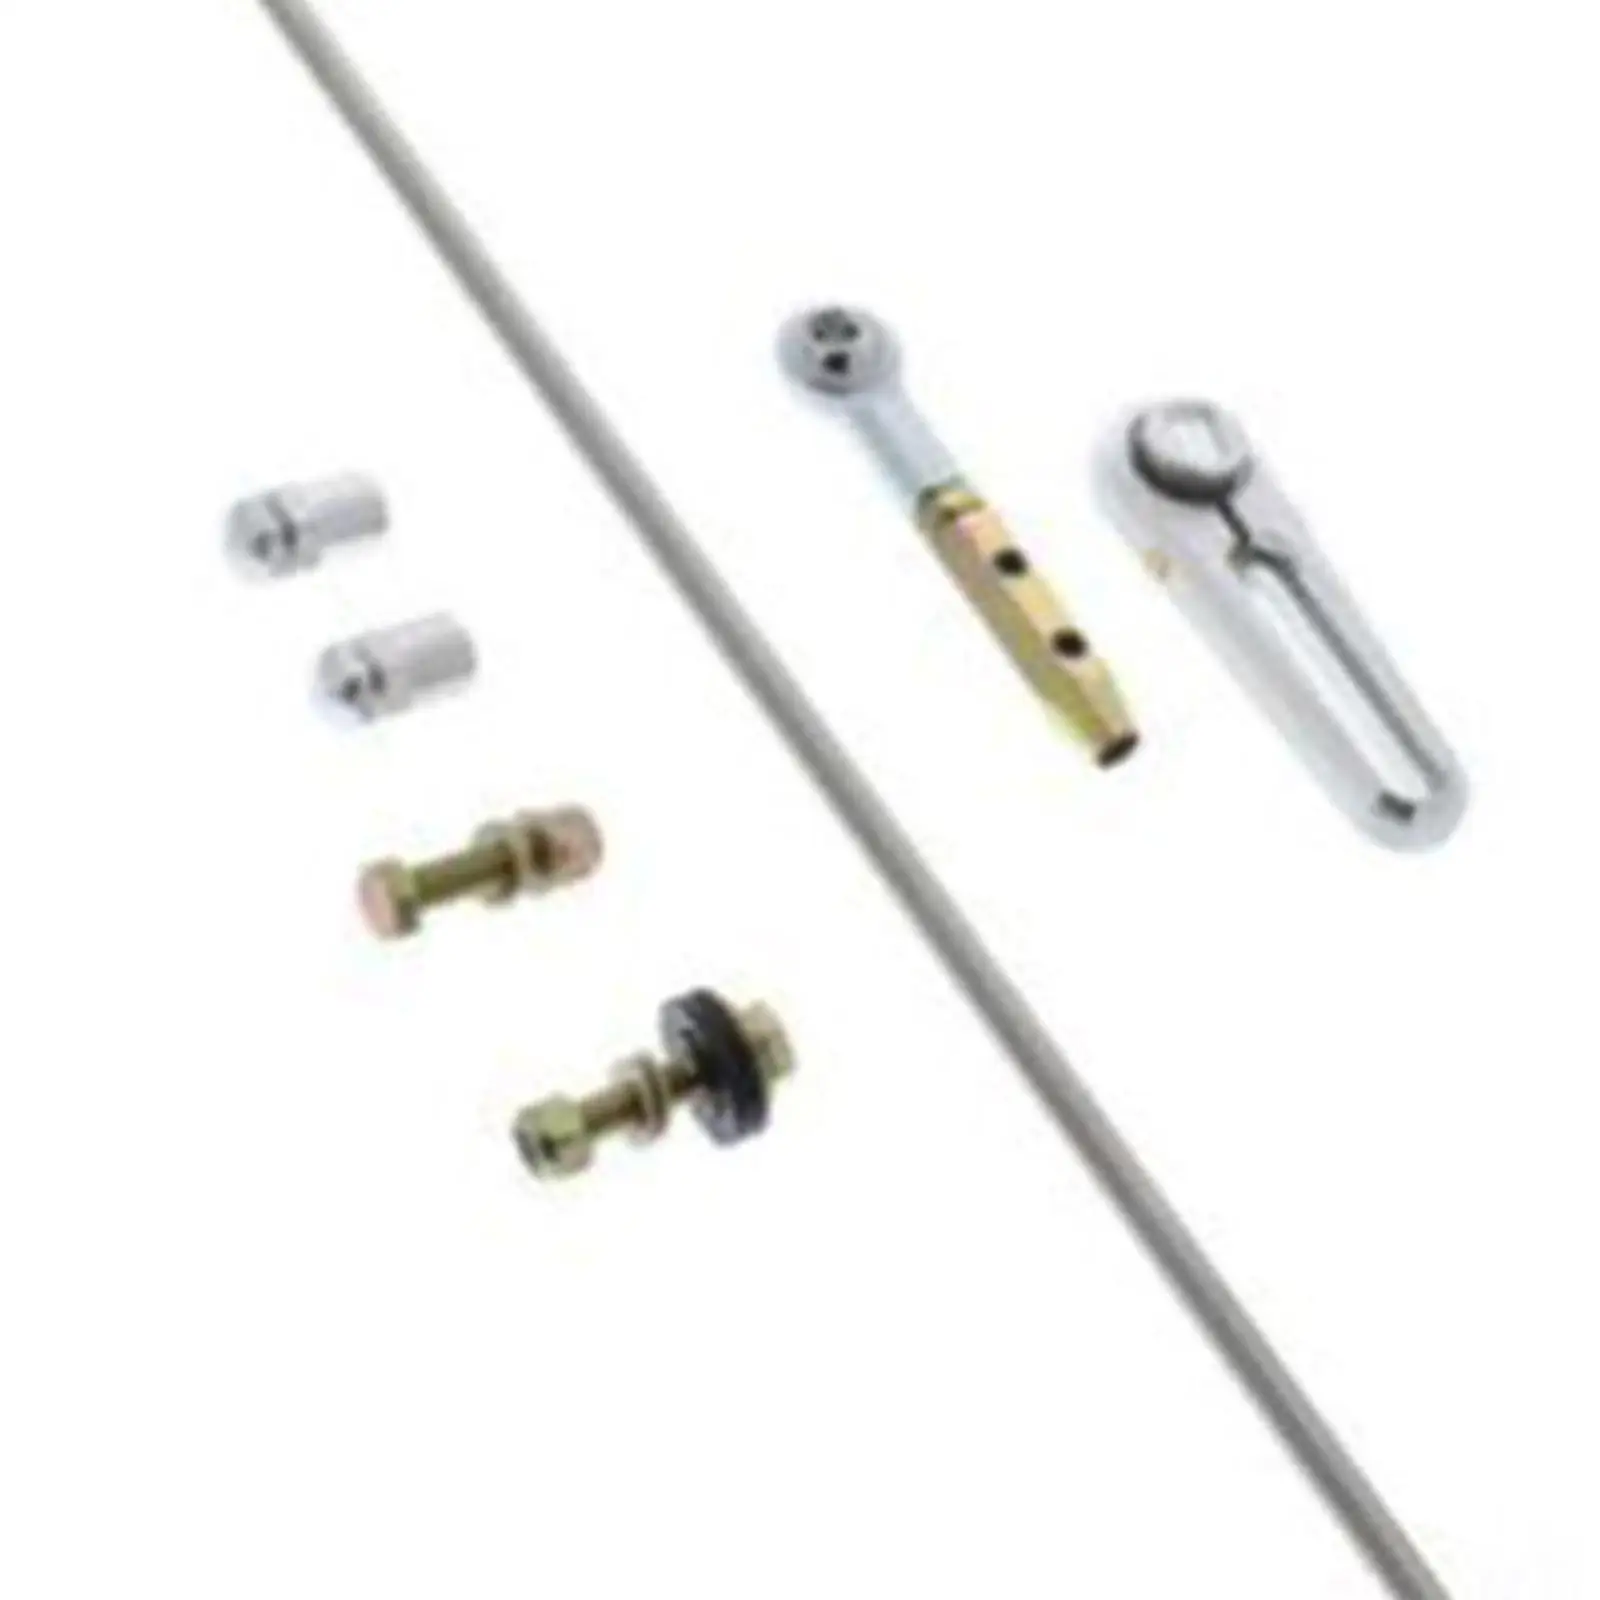 Transmission Shift Linkage Kit Premium Replacement for GM 700R4 4L60